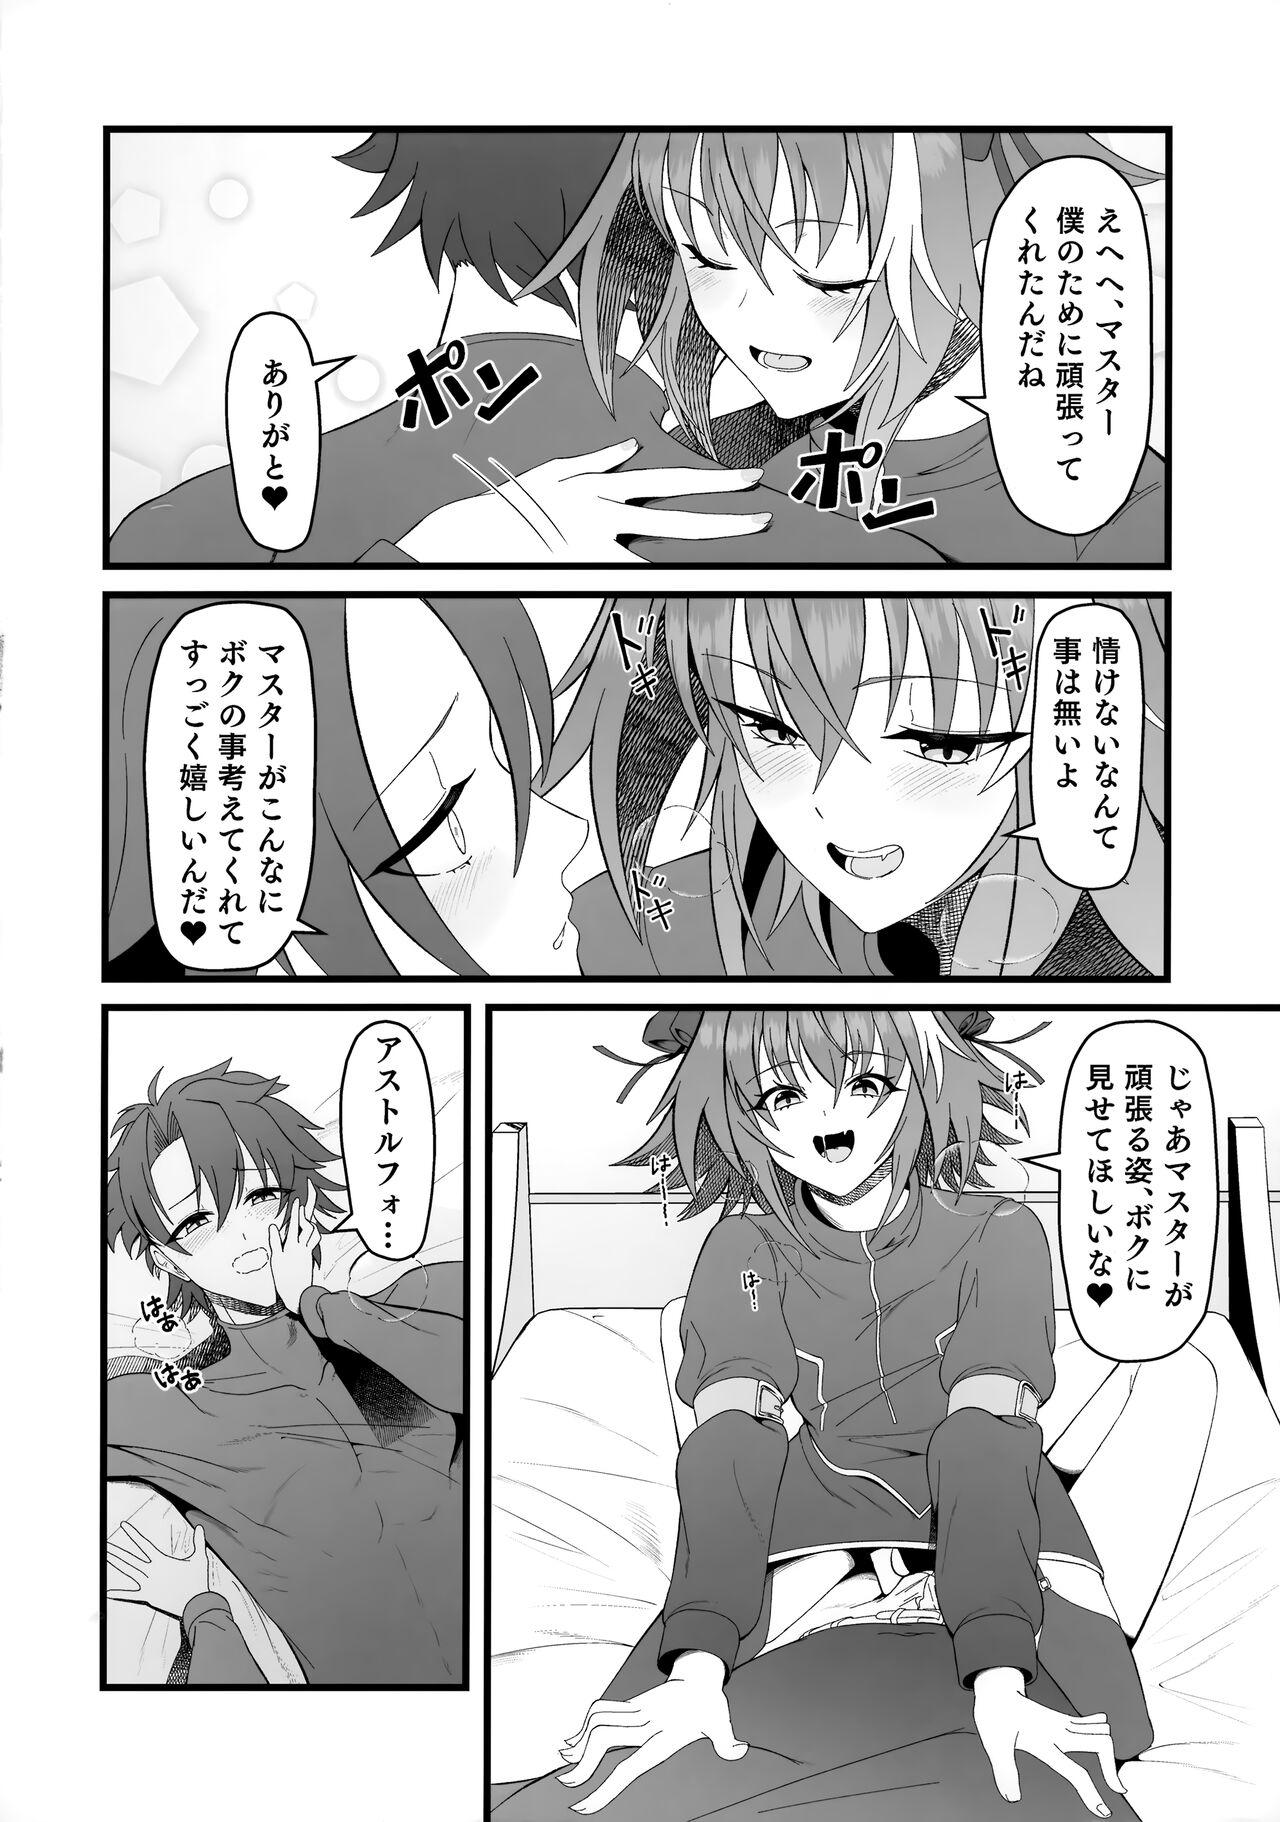 Tugging Kimi no Ichiban ni Naritakute - I wanted to be your number one. - Fate grand order Closeup - Page 9